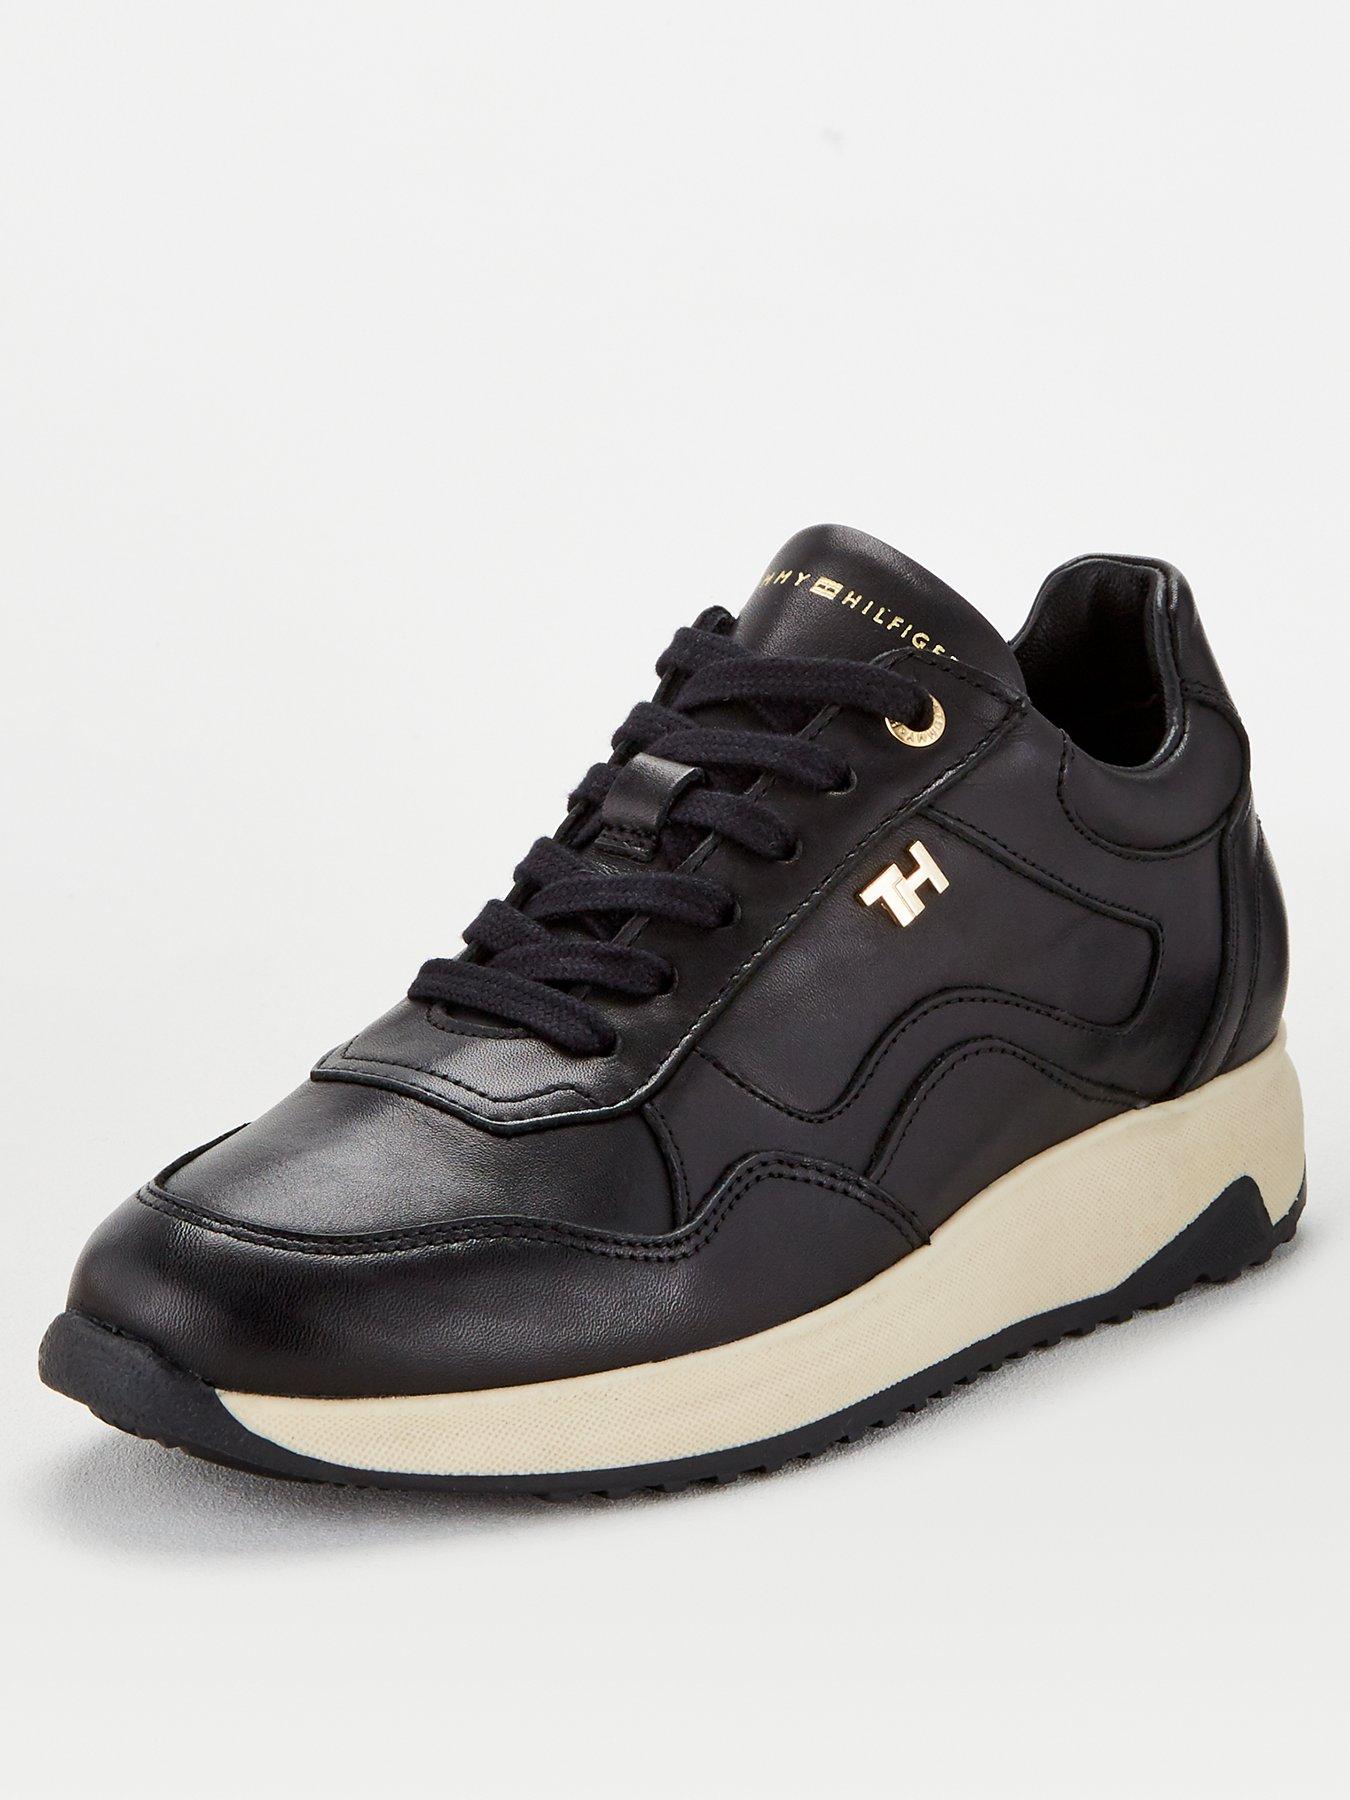 Tommy hilfiger | Womens trainers 